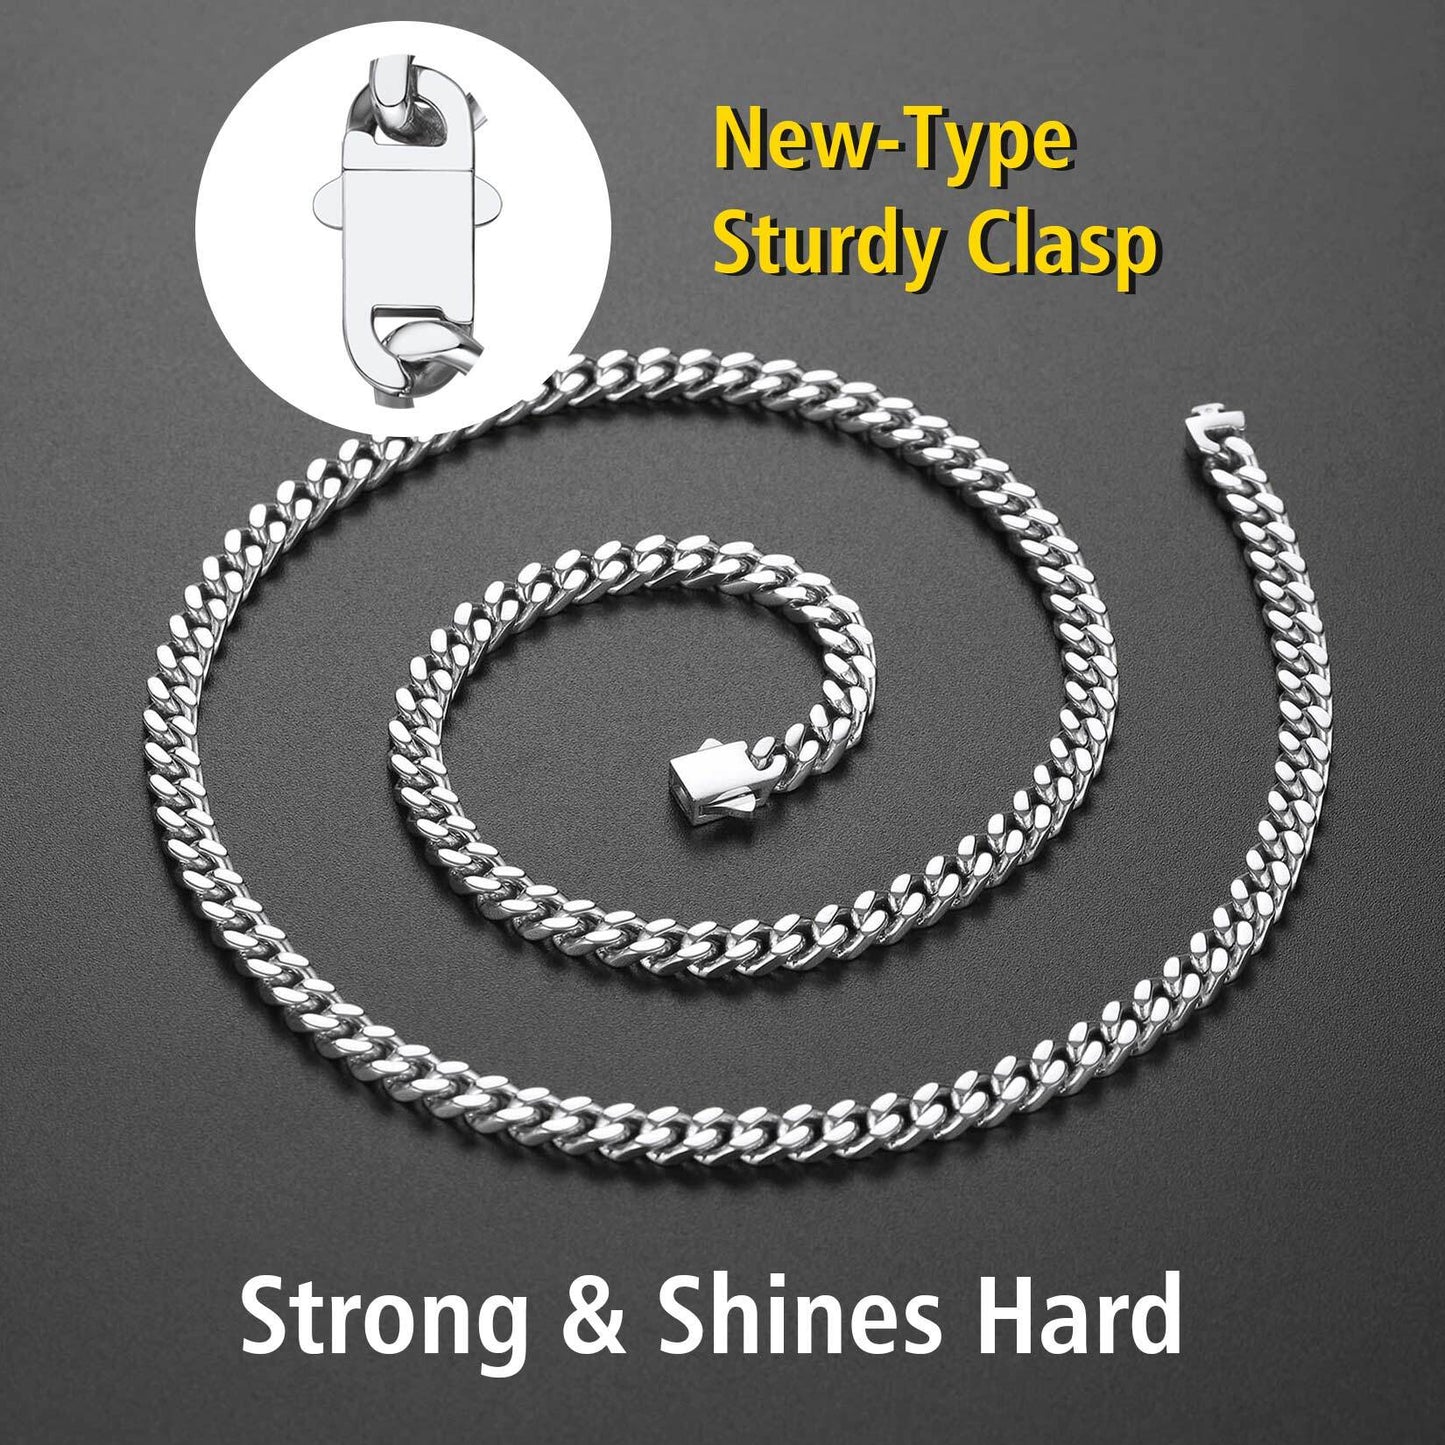 ChainsPro Curb Link Necklace 18inch Mens Chain Cuban Chain Mens Jewelry Stainless Steel Necklace for Men